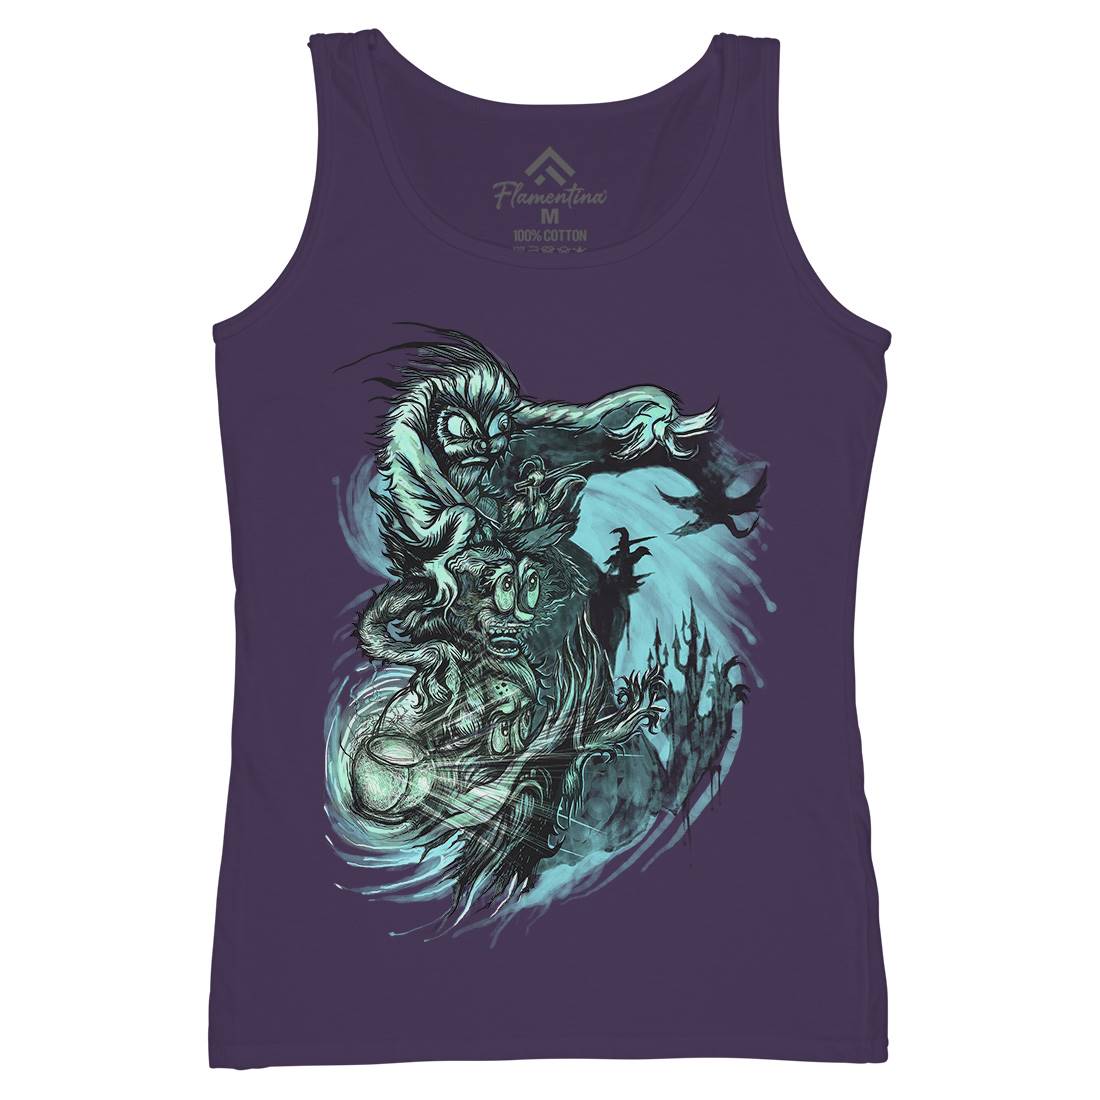 Playing With Shadows Womens Organic Tank Top Vest Horror D077